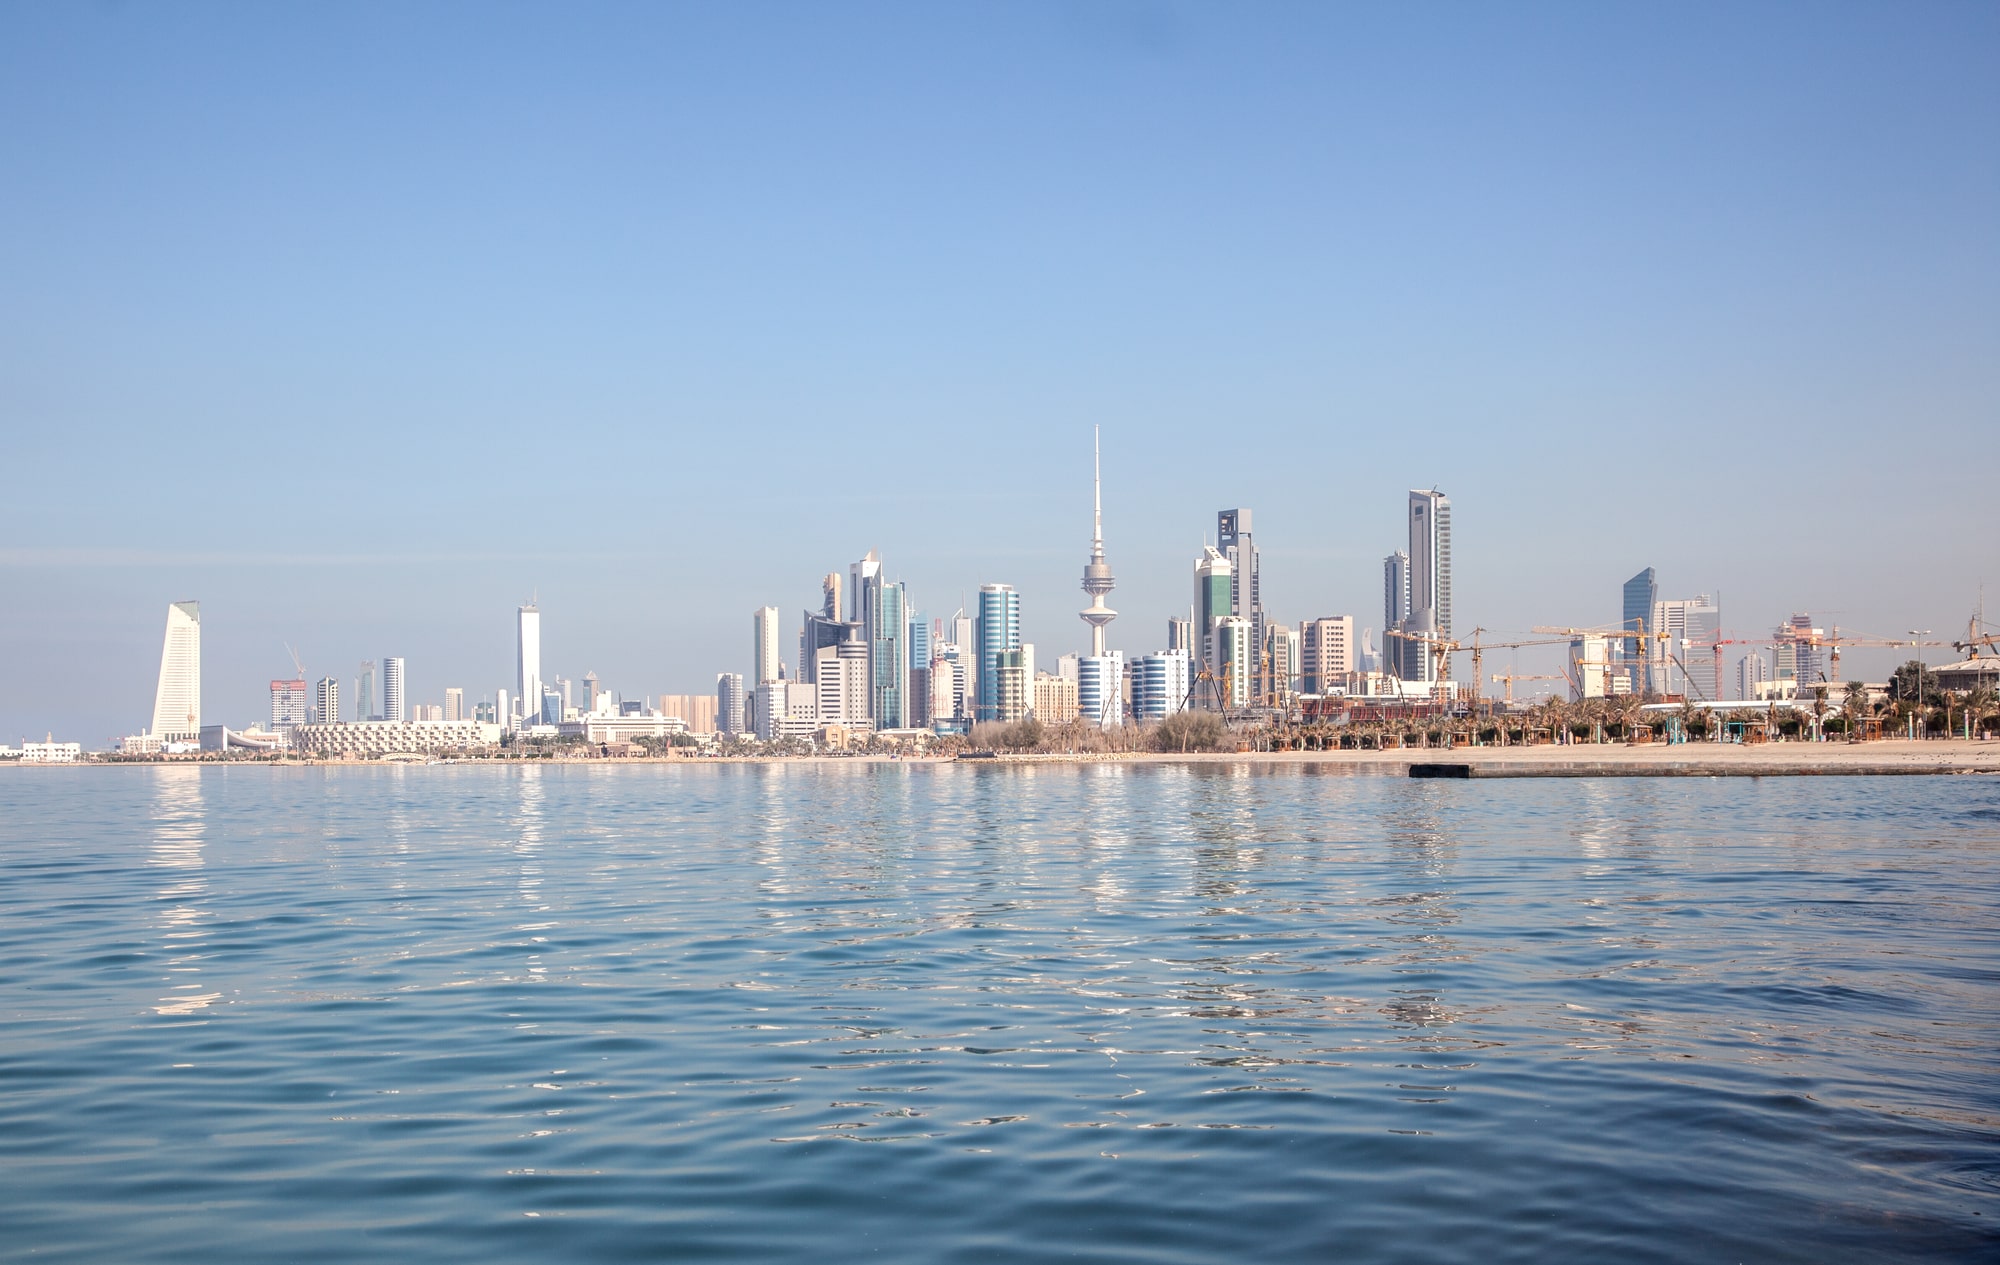 At 53.5°C, Kuwaiti city becomes the hottest place on Earth